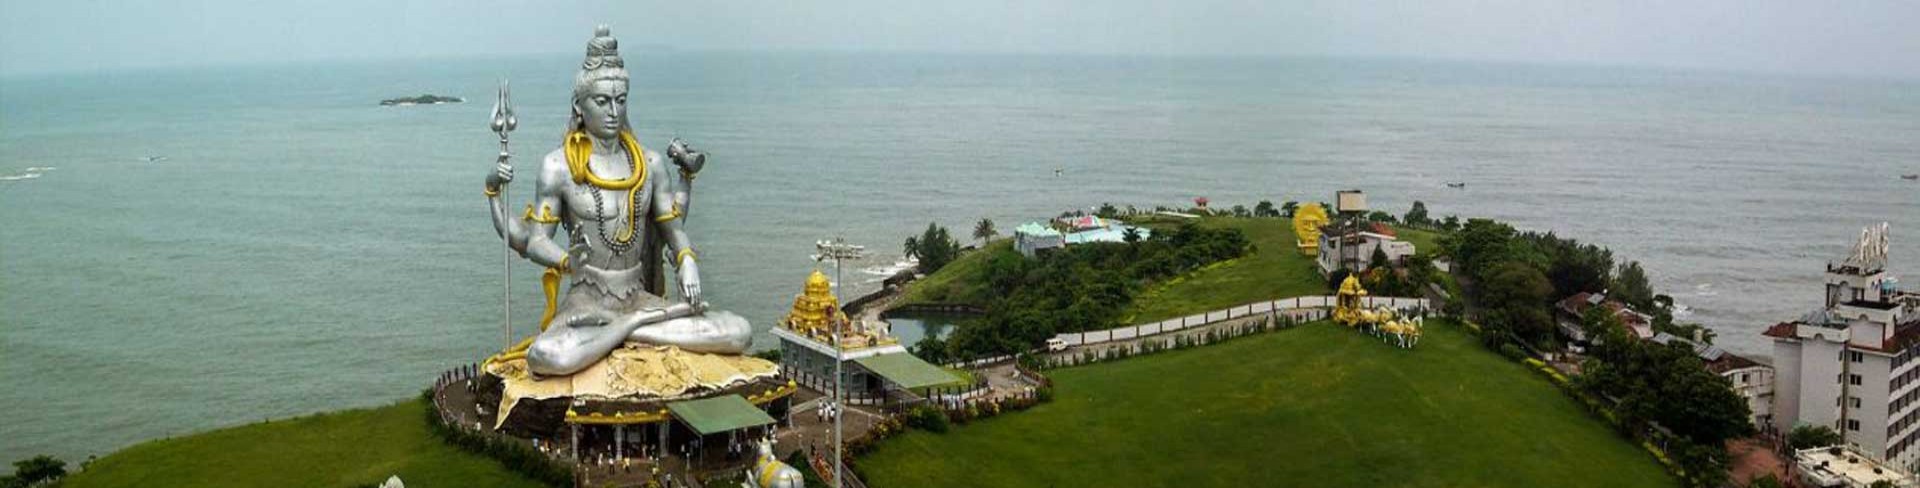 murudeshwar tour packages from pune